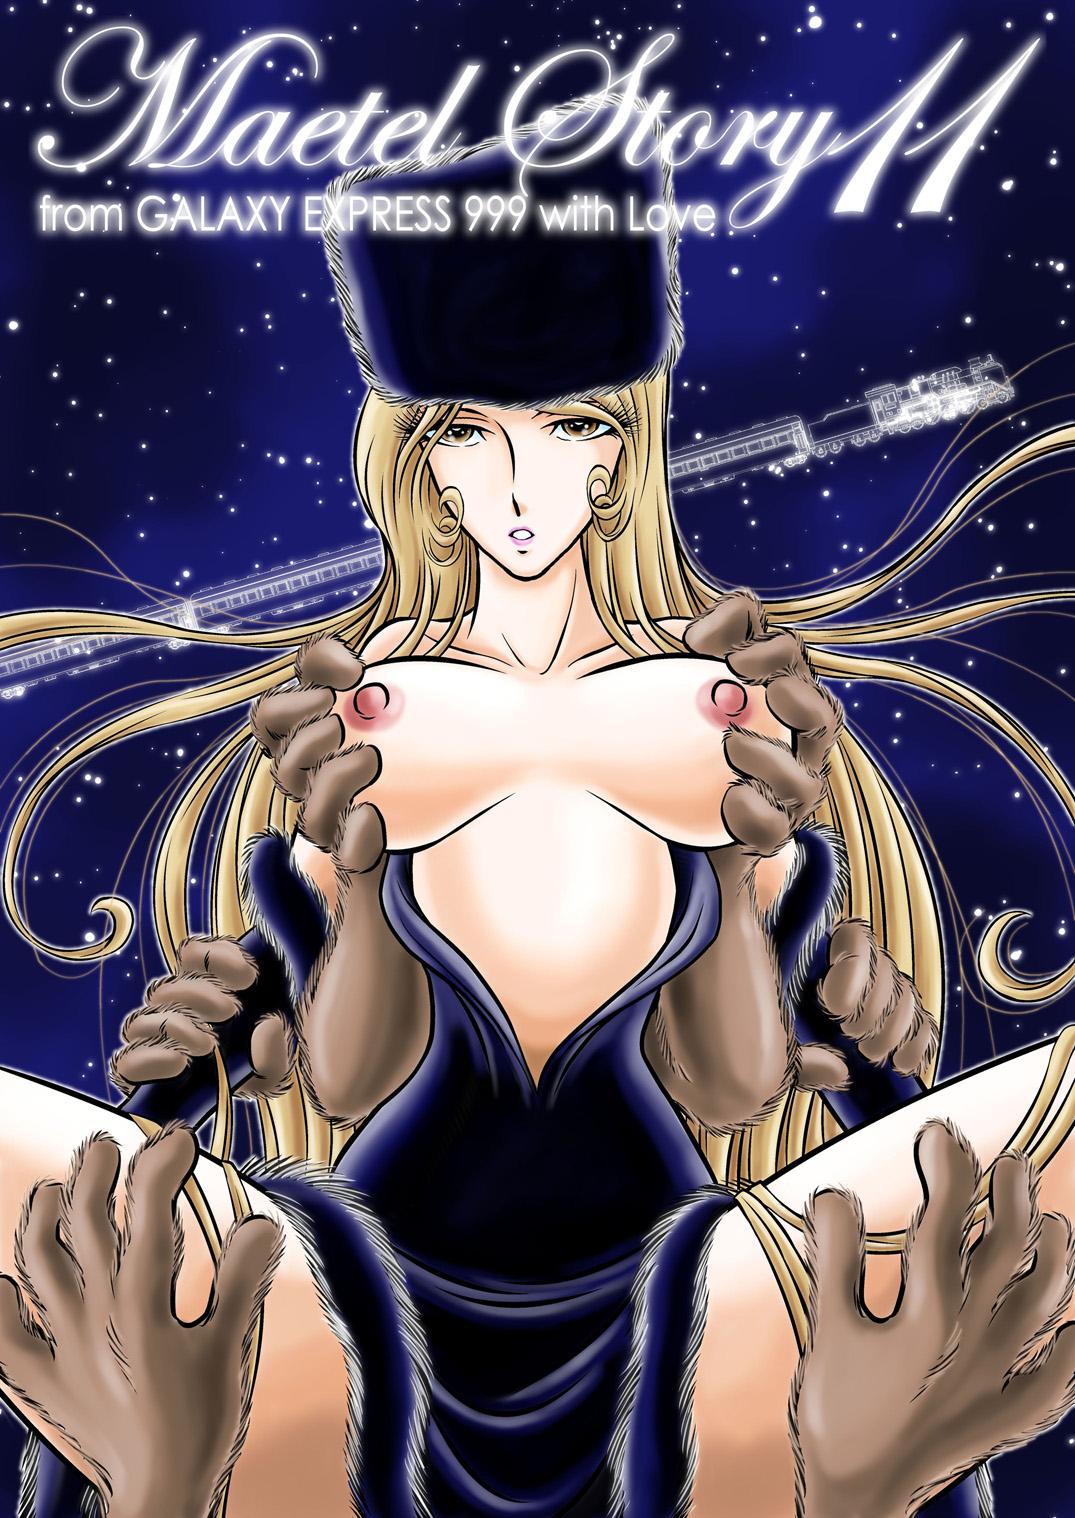 Onlyfans Maetel Story 11 - Galaxy express 999 Phat - Page 1